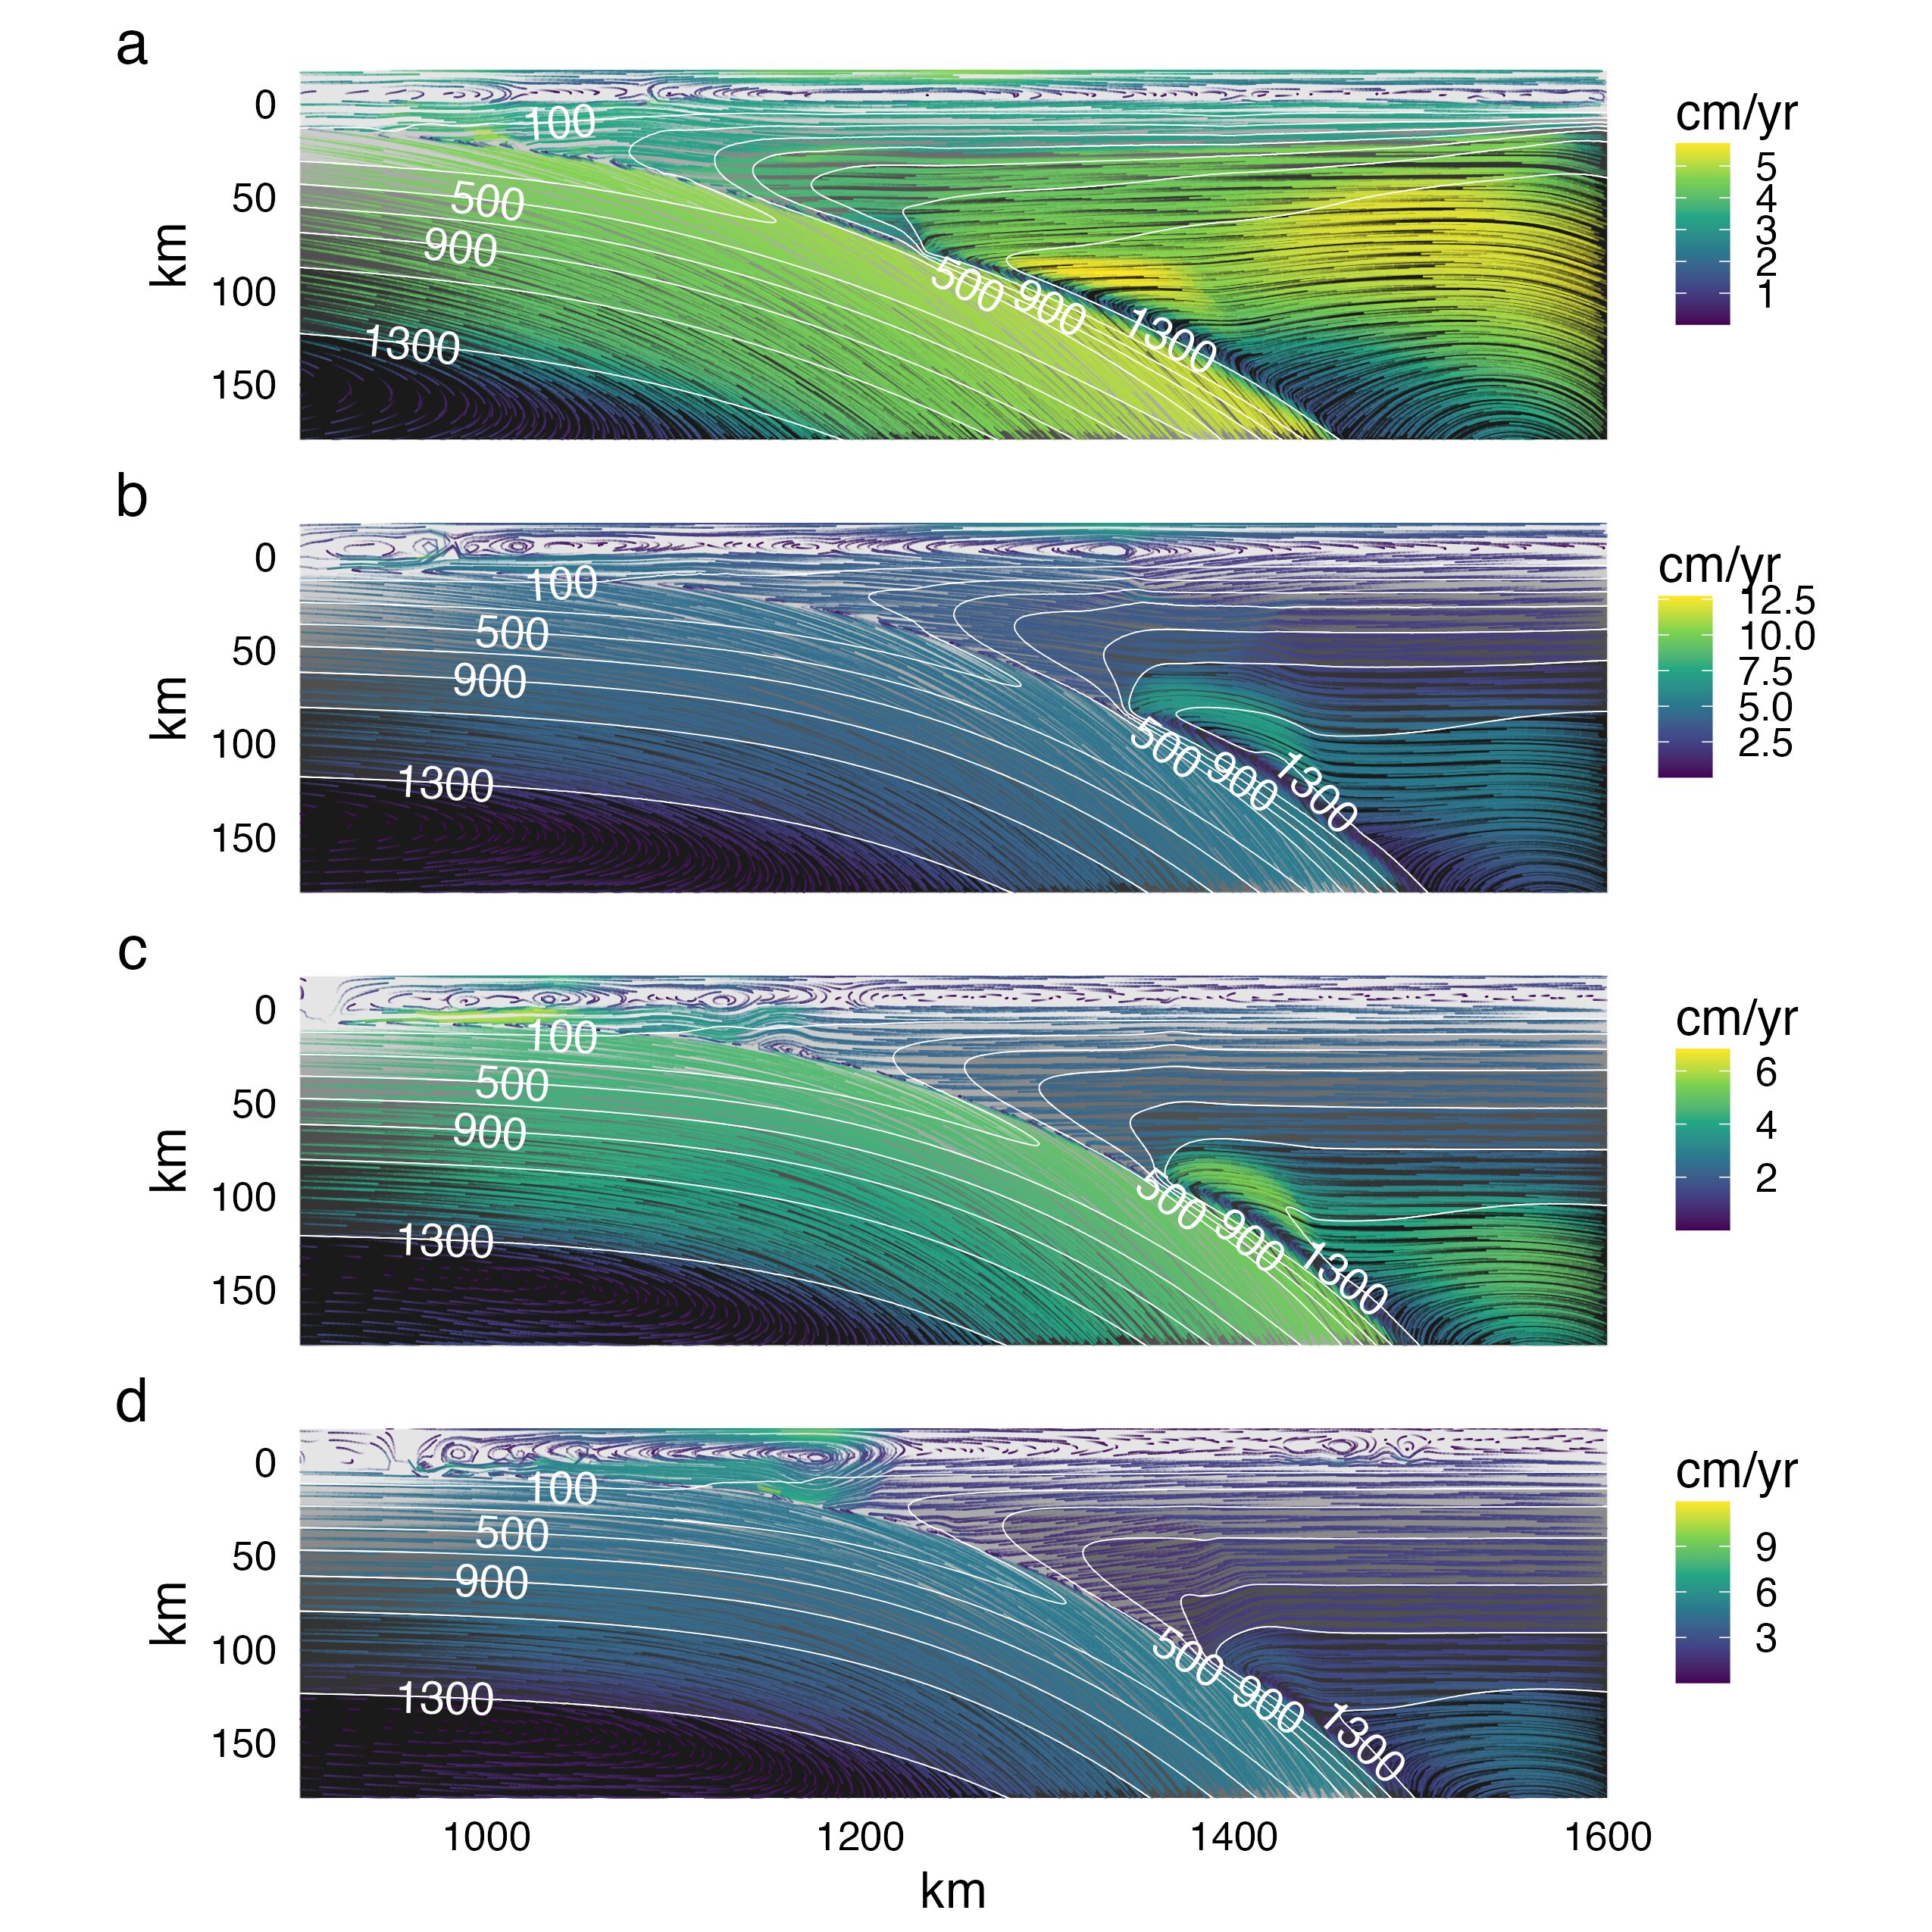 Visualizing mantle flow at approximately 10 Ma for model cdf with upper-plate thickness of (a) 46, (b) 62, (c) 78, and (d) 94 km. All experiments are plotted on the same scale and location within the model domain. The flow of warm mantle is restricted to below the 1100˚C isotherm, which corresponds to the base of the upper-plate lithosphere (\(Z_{UP}\)). A minimum coupling depth (\(Z_{cpl}\)) appears to exist as models with extremely thin lithospheres (a) exhibit coupling at \(\sim\) 70-80 km depth. \(Z_{cpl}\) generally increases with increasing \(Z_{UP}\) as mantle flow and advective heat transport are restricted to greater depths.